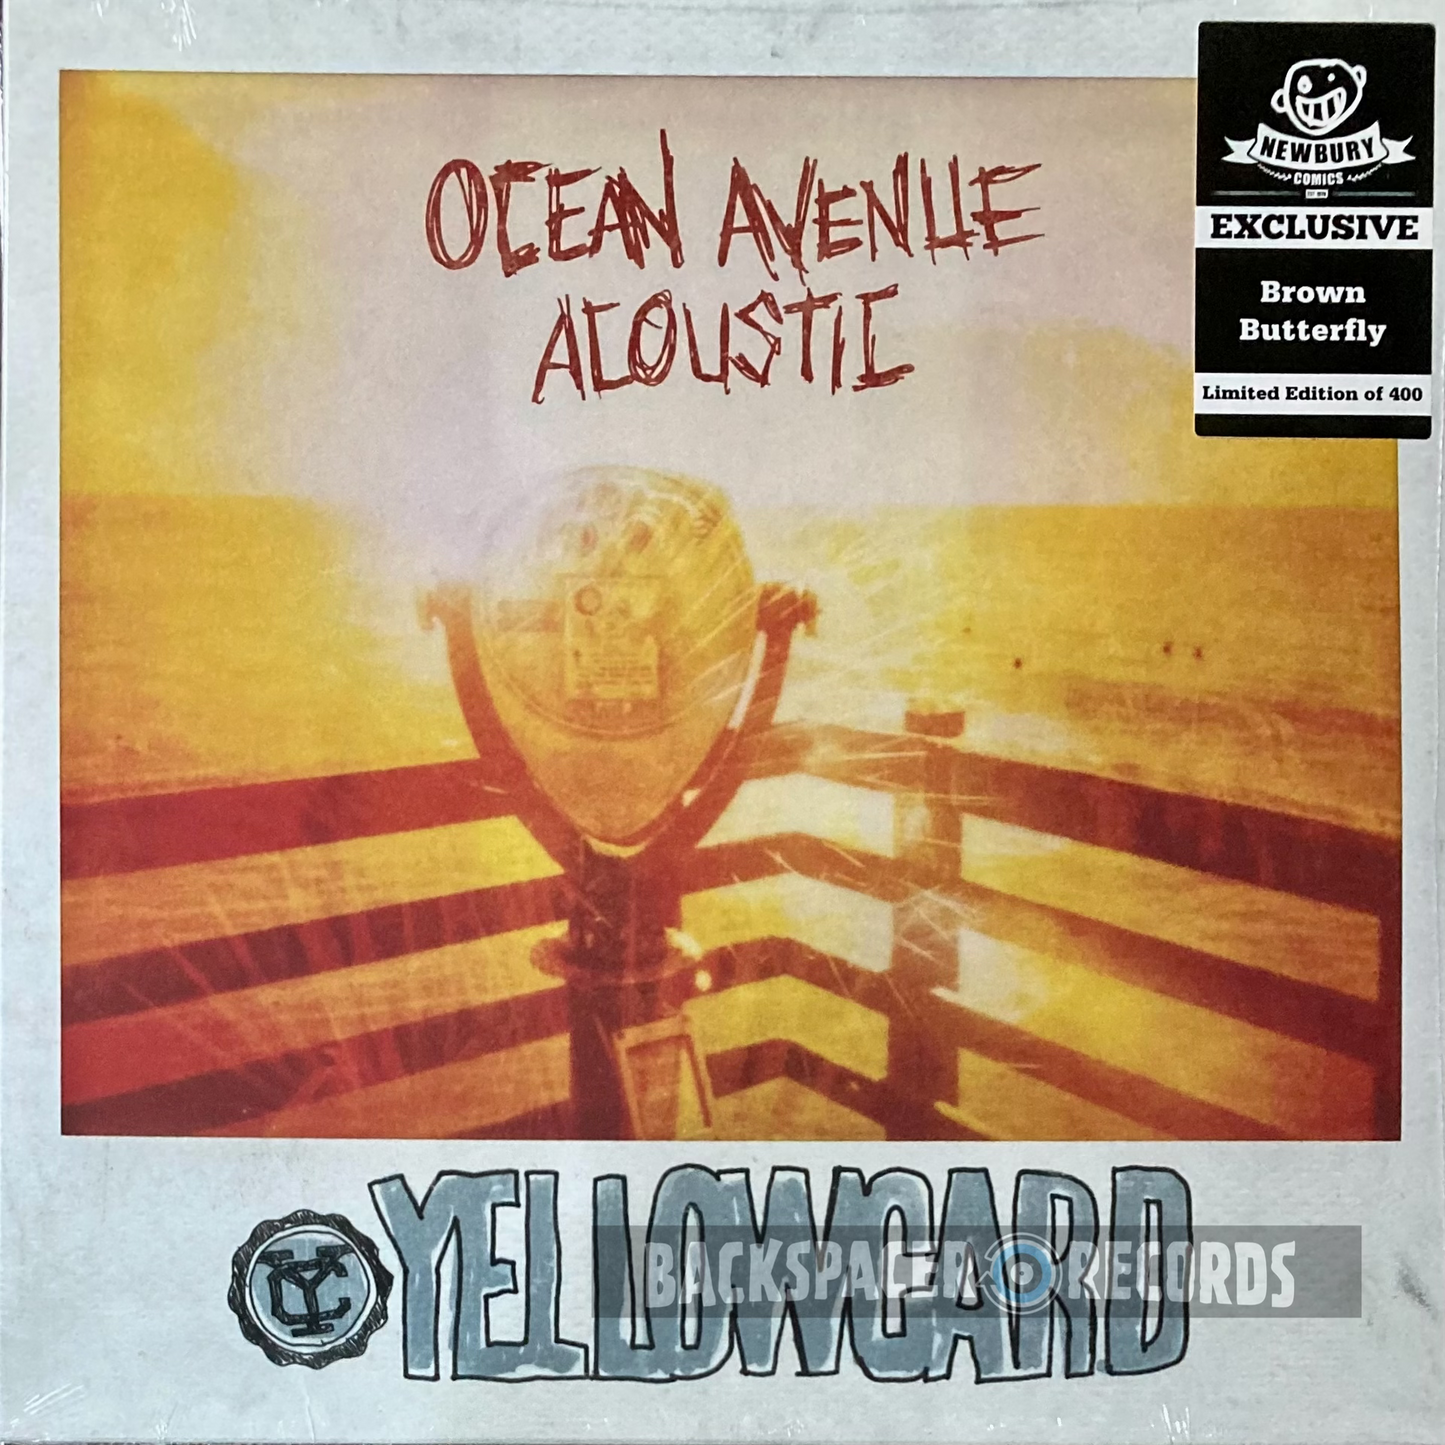 Yellowcard – Ocean Avenue Acoustic (Limited Edition) LP (Sealed)